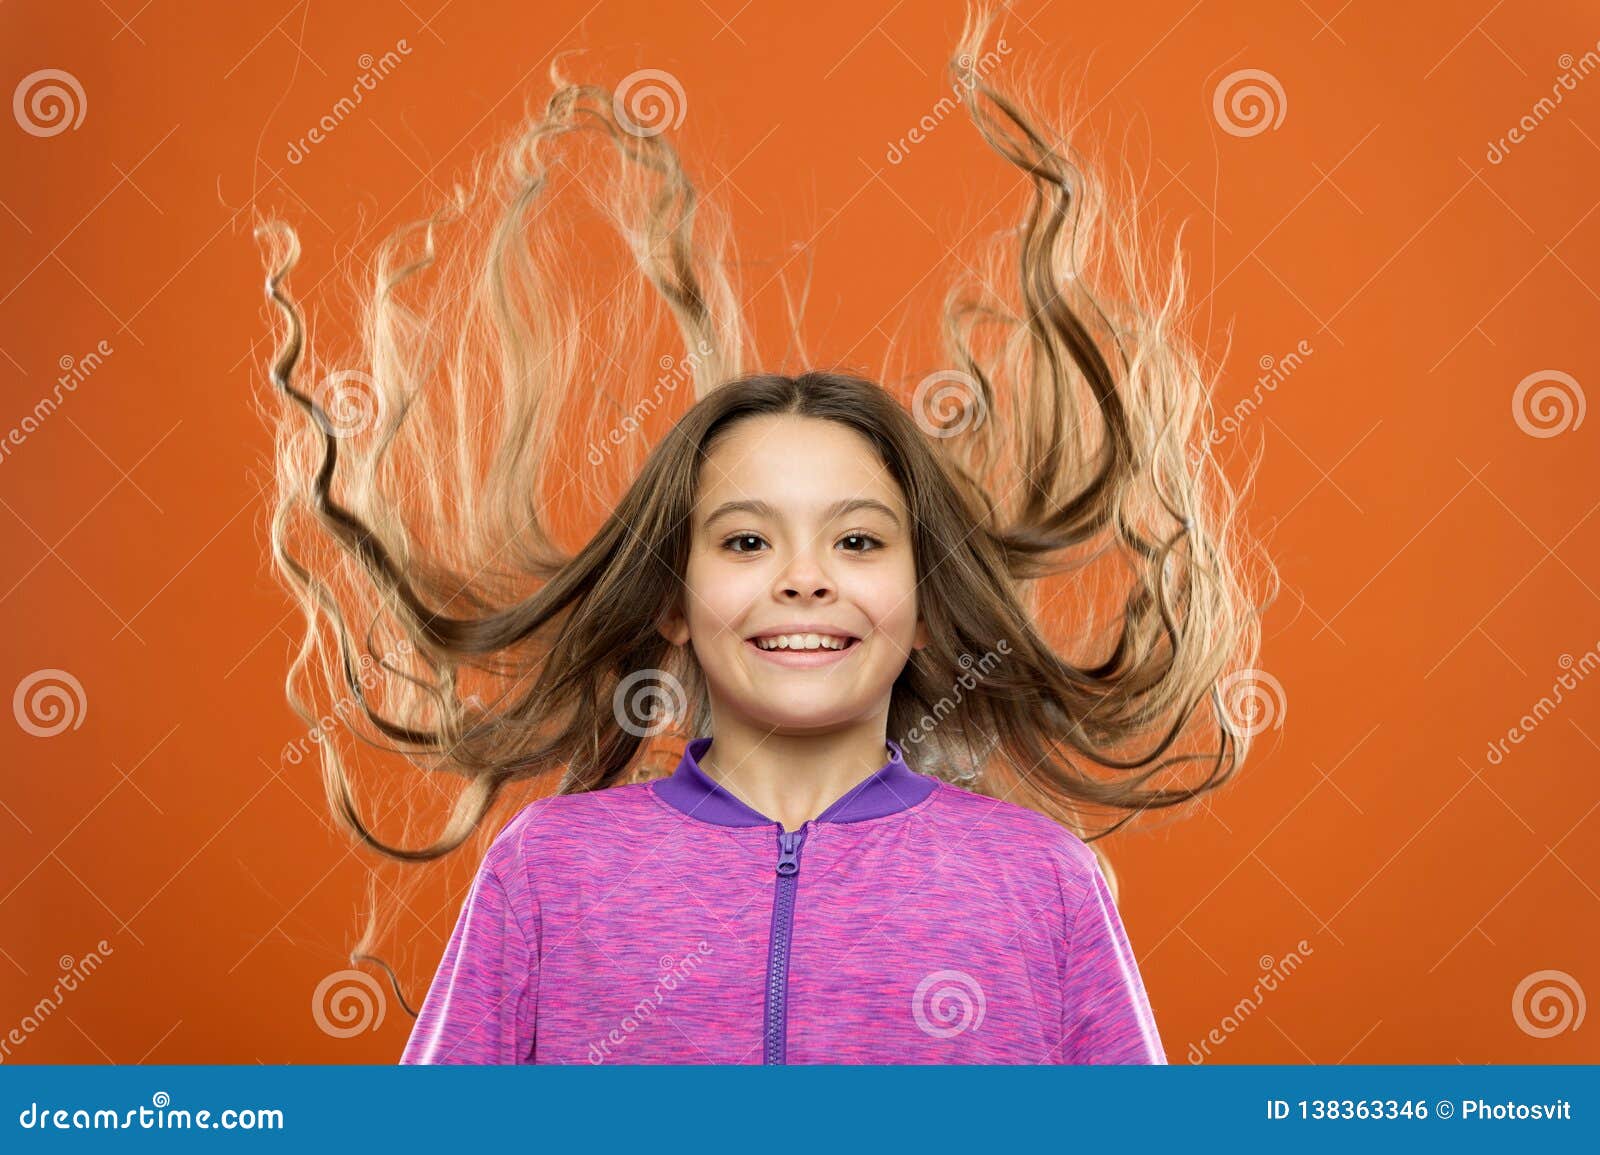 How To Treat Curly Hair. Nice and Tidy Hairstyle. Easy Tips Making Hairstyle  for Kids. Small Child Long Hair Stock Photo - Image of mask, girl: 138363346